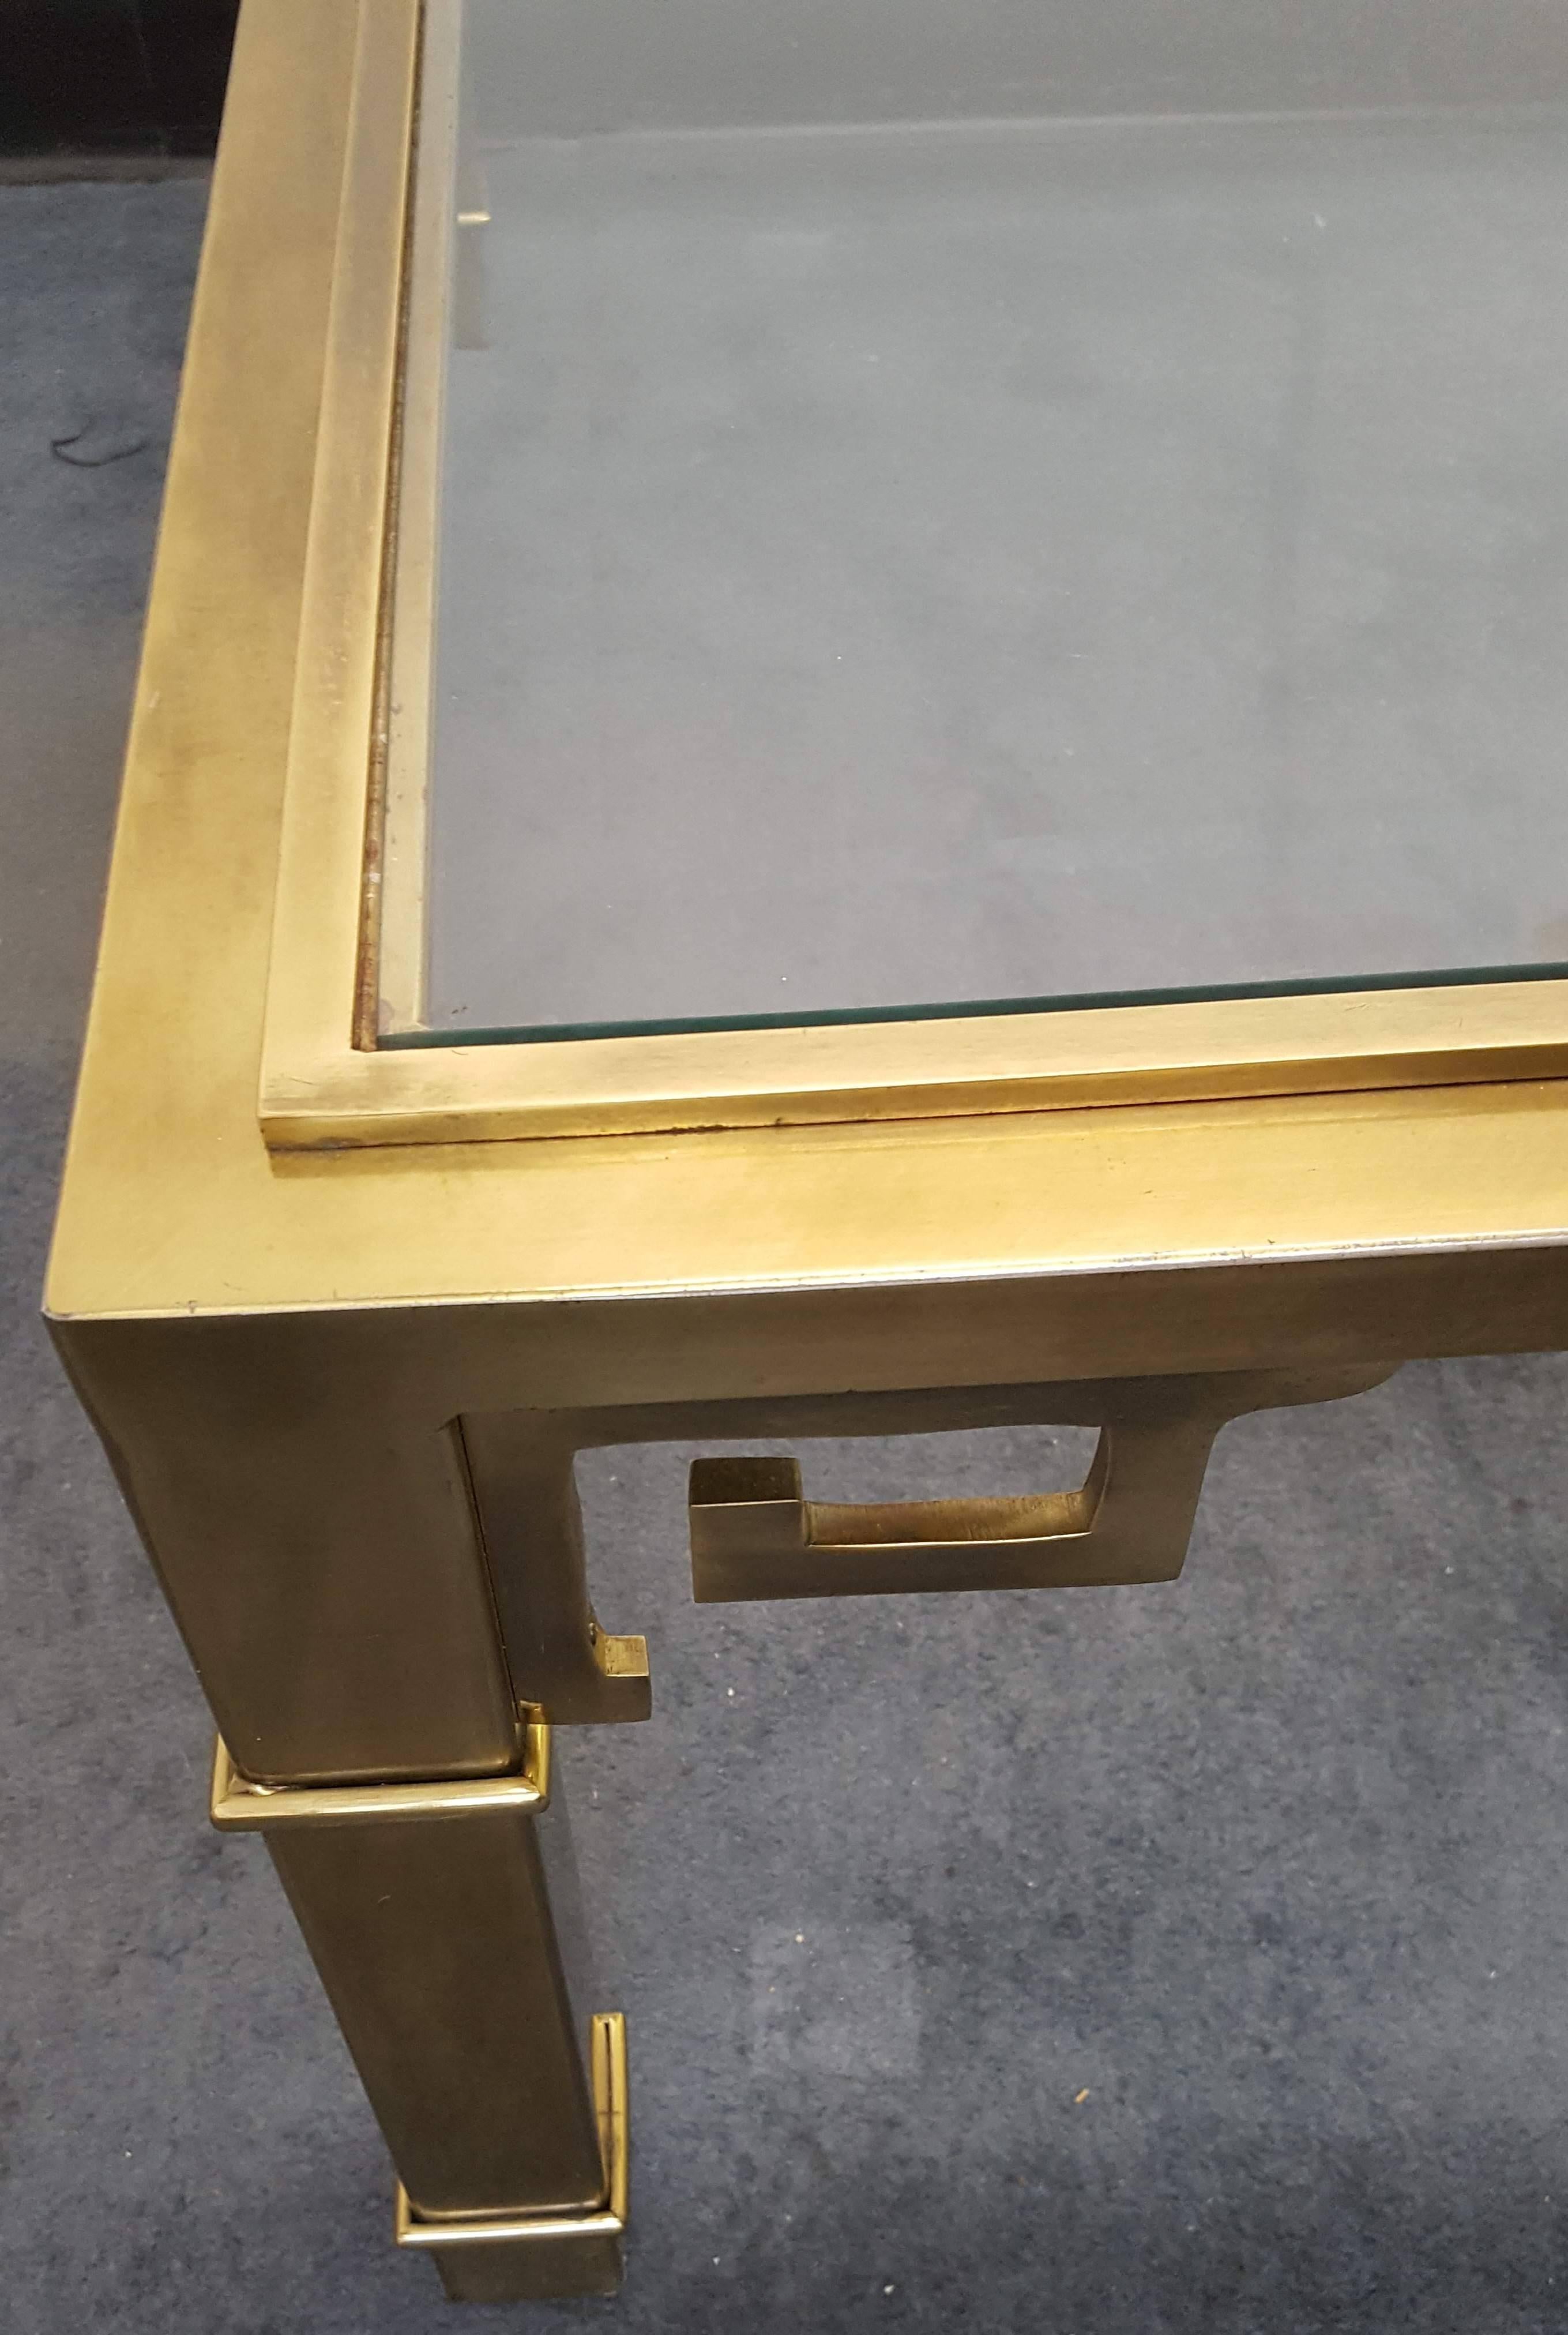 Classic, beautifully crafted vintage brass and glass Mastercraft square coffee table with Greek key details around each leg. Beveled glass top. 1970s.